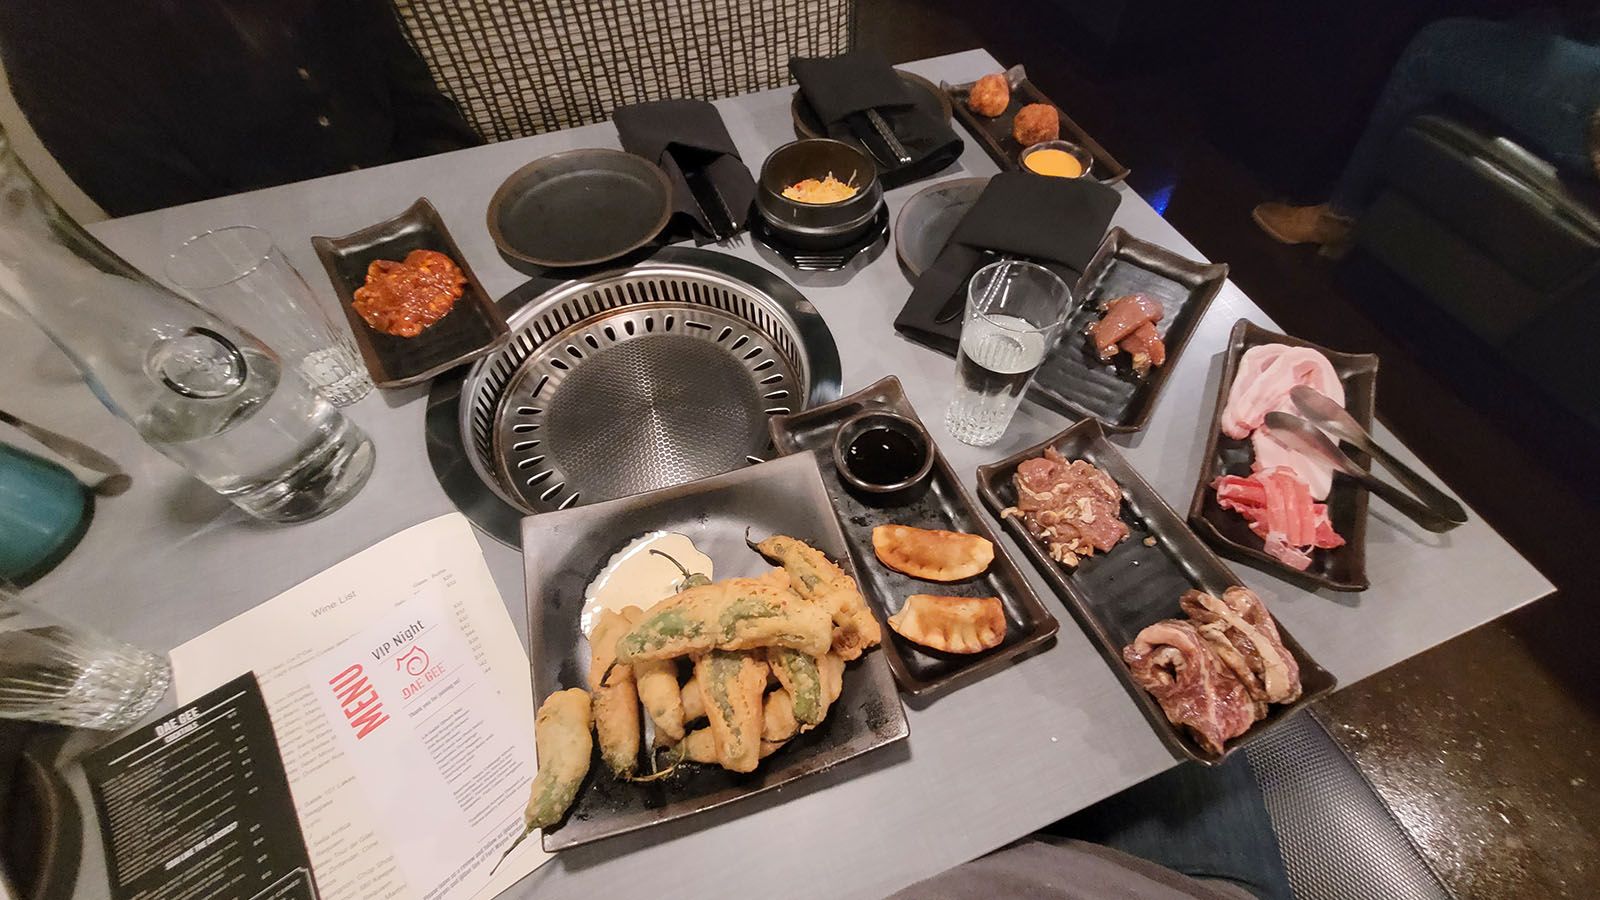 Dae Gee Korean BBQ is now open at 4910 N. Clinton St. in Fort Wayne.